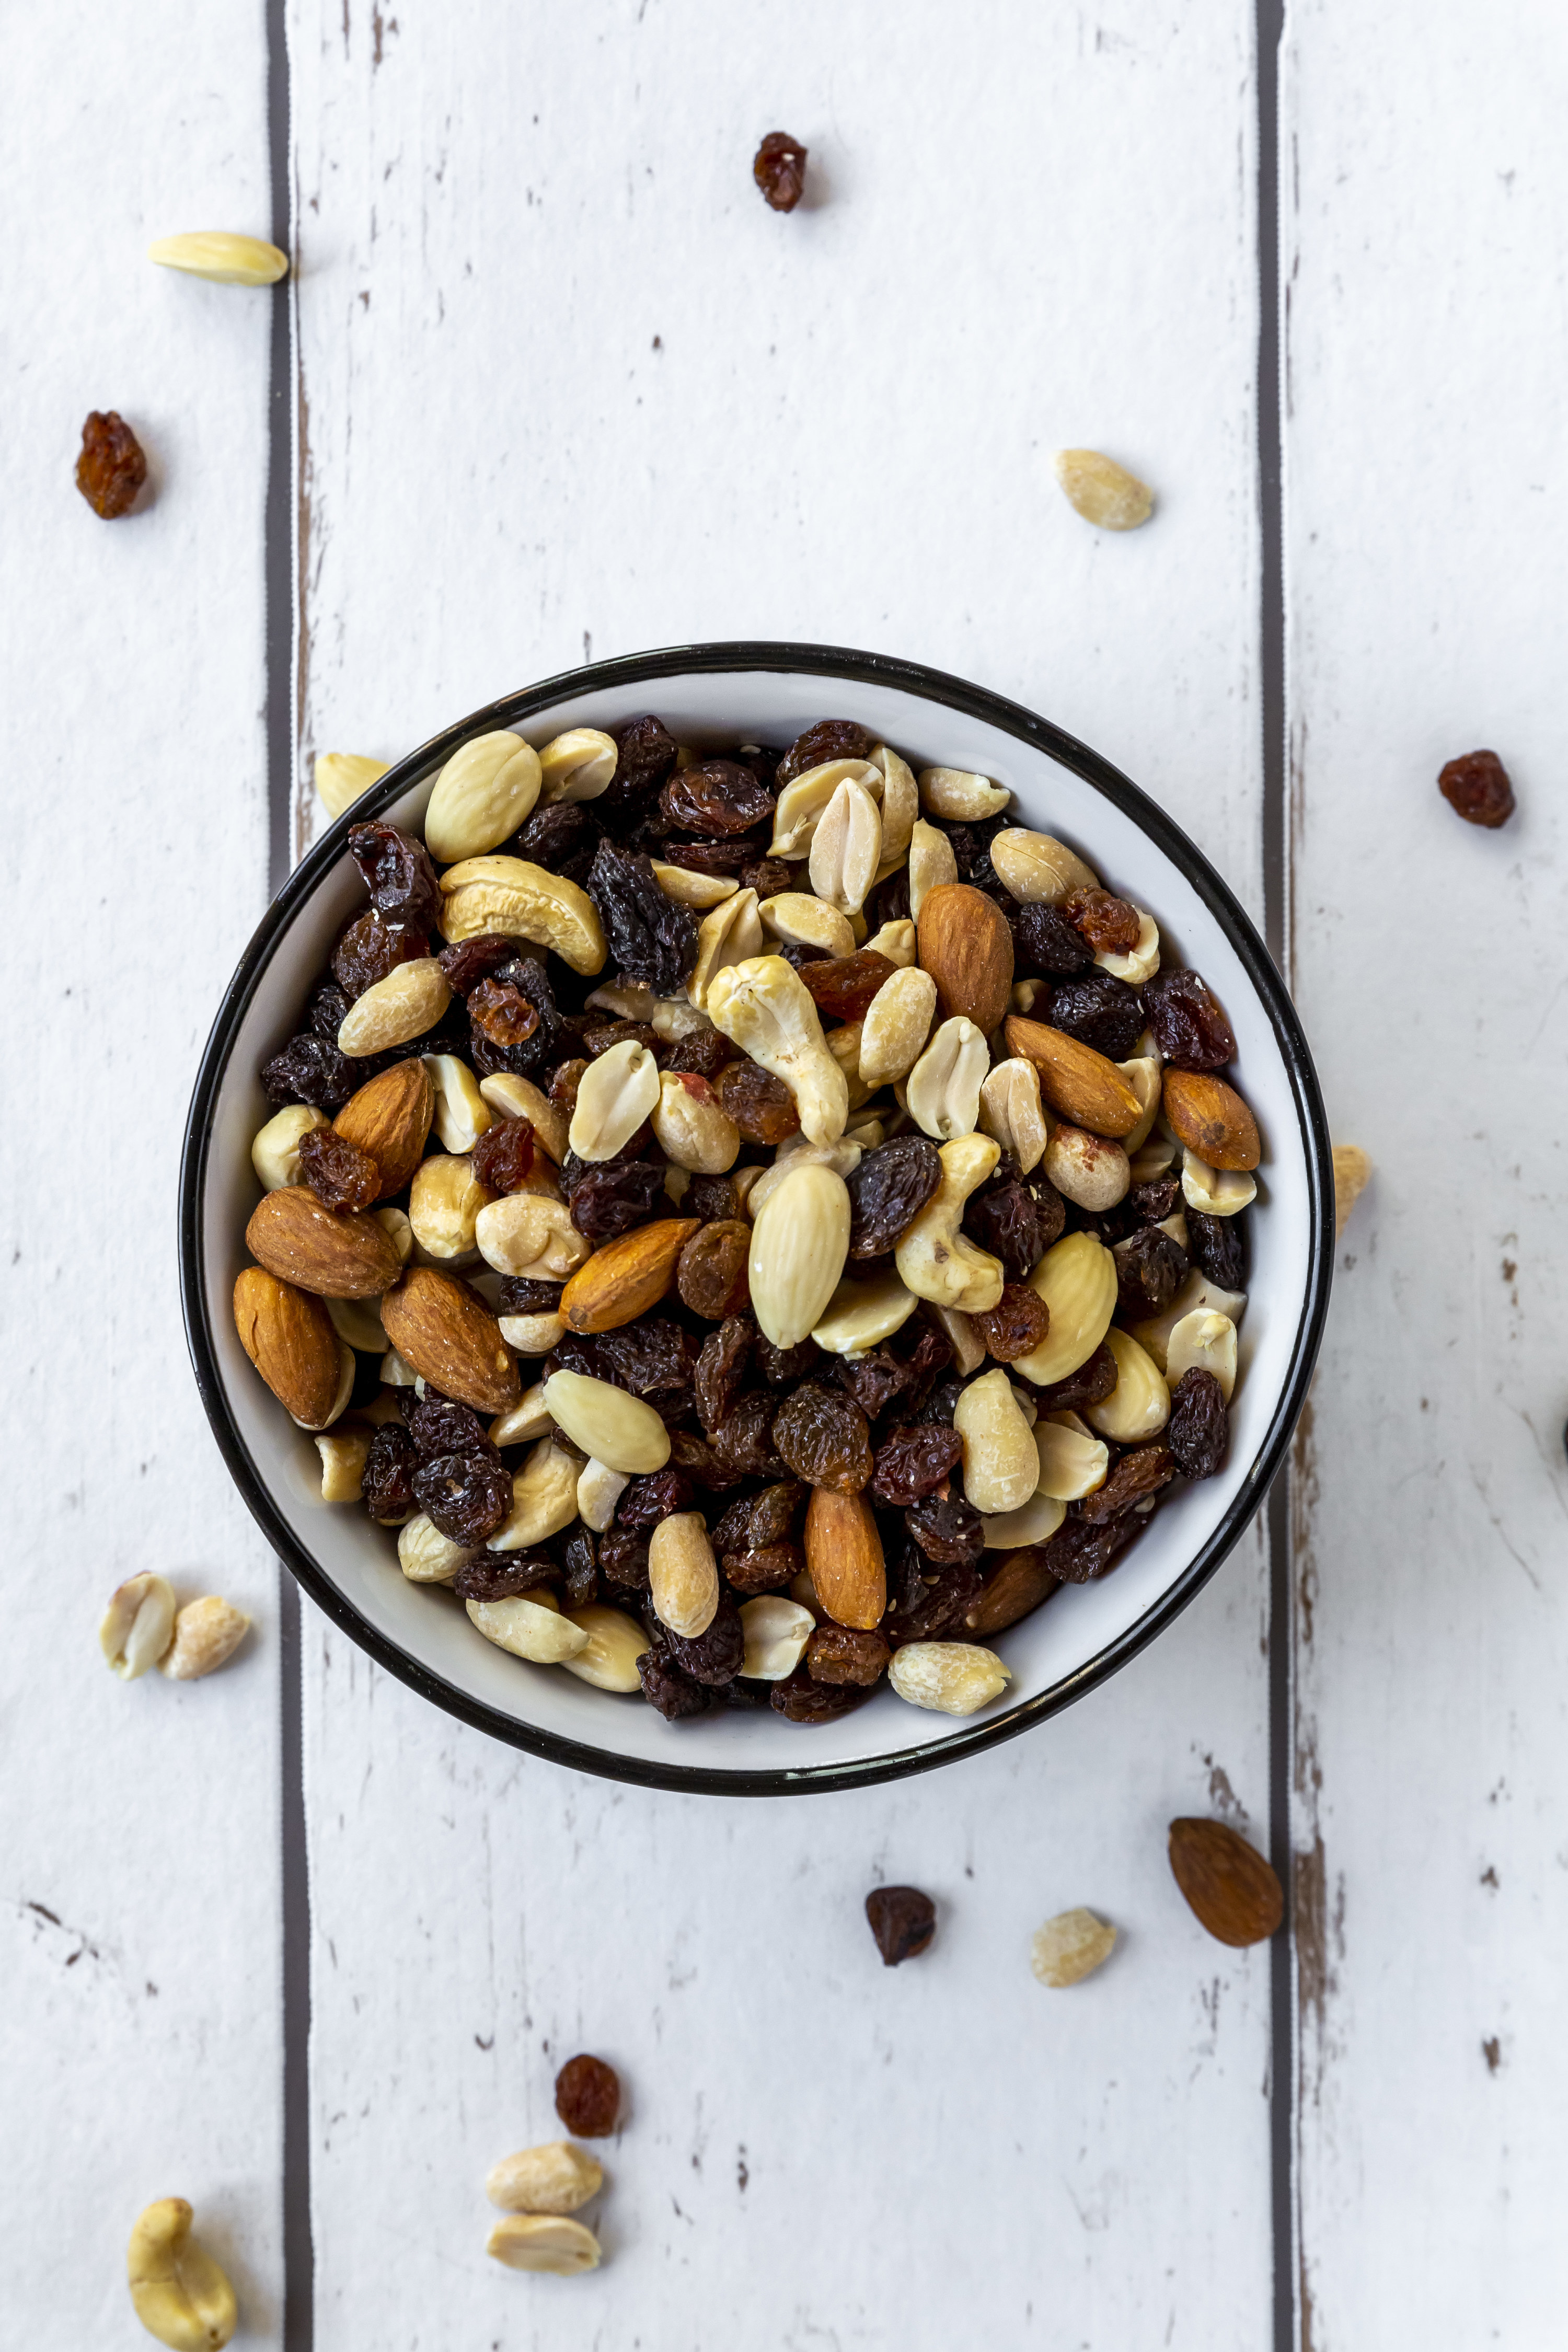 A bowl filled with peanuts, almonds and sultanas  